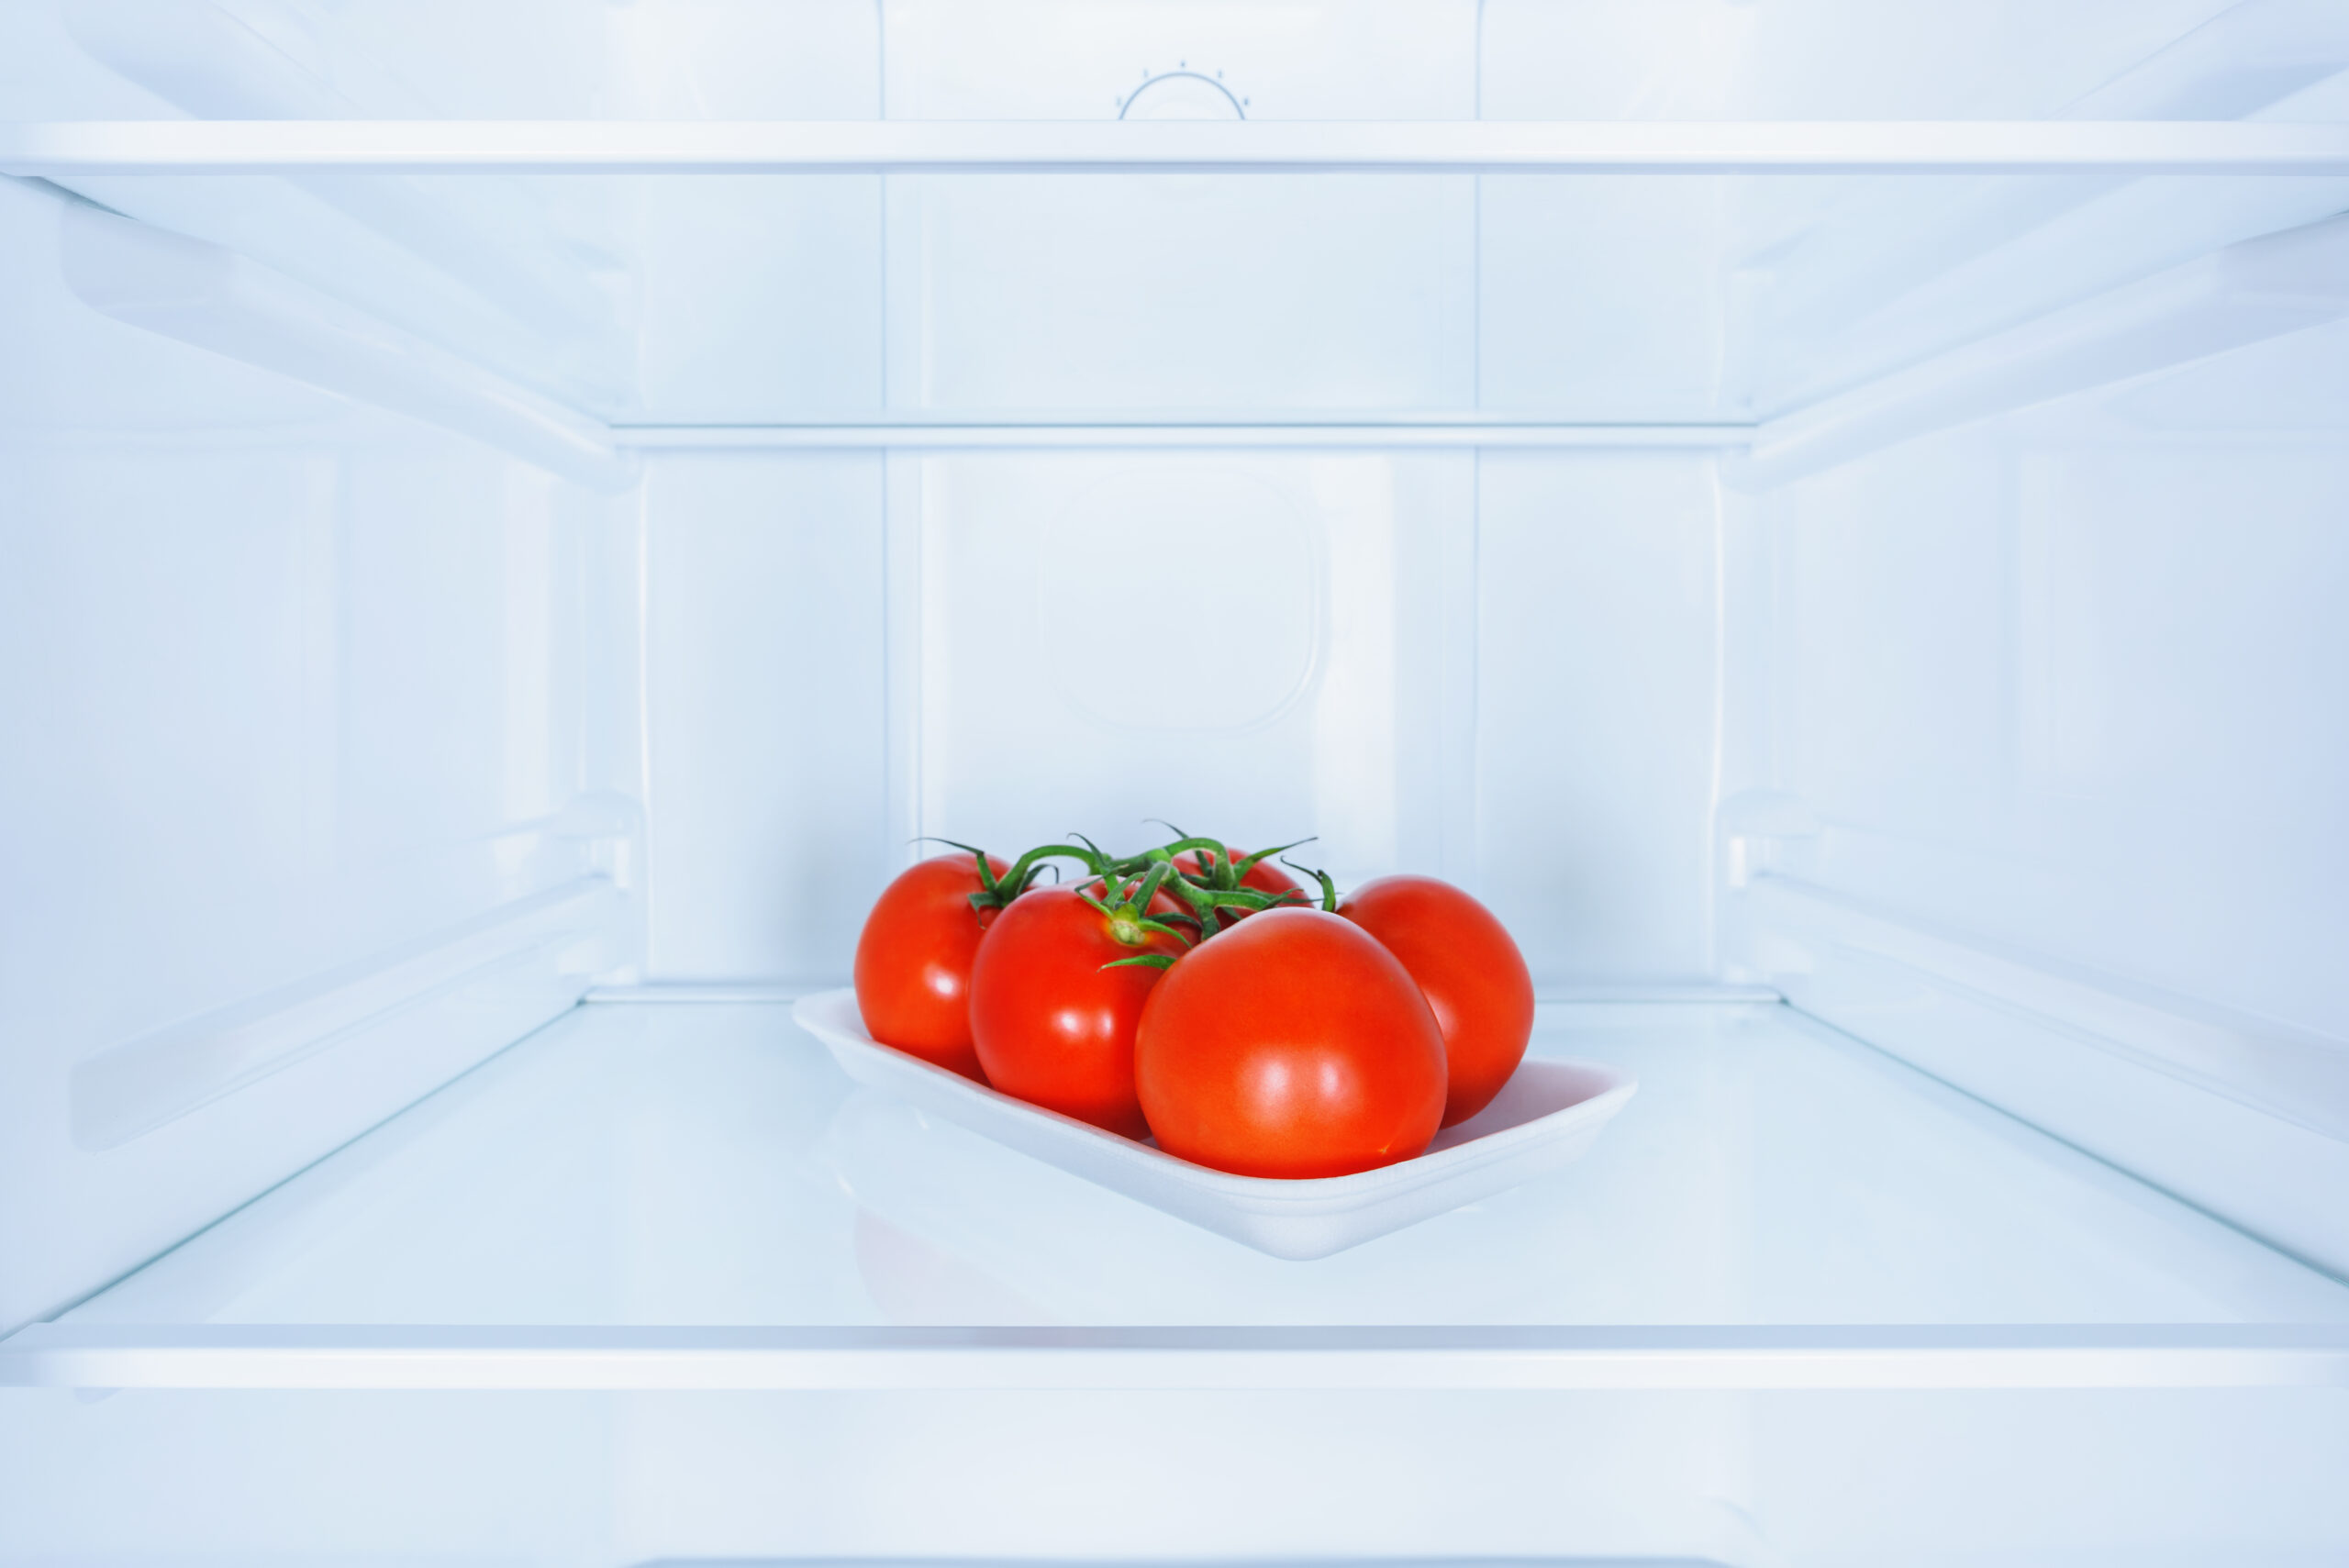 red tomatoes in fridge | https://fruitsauction.com/